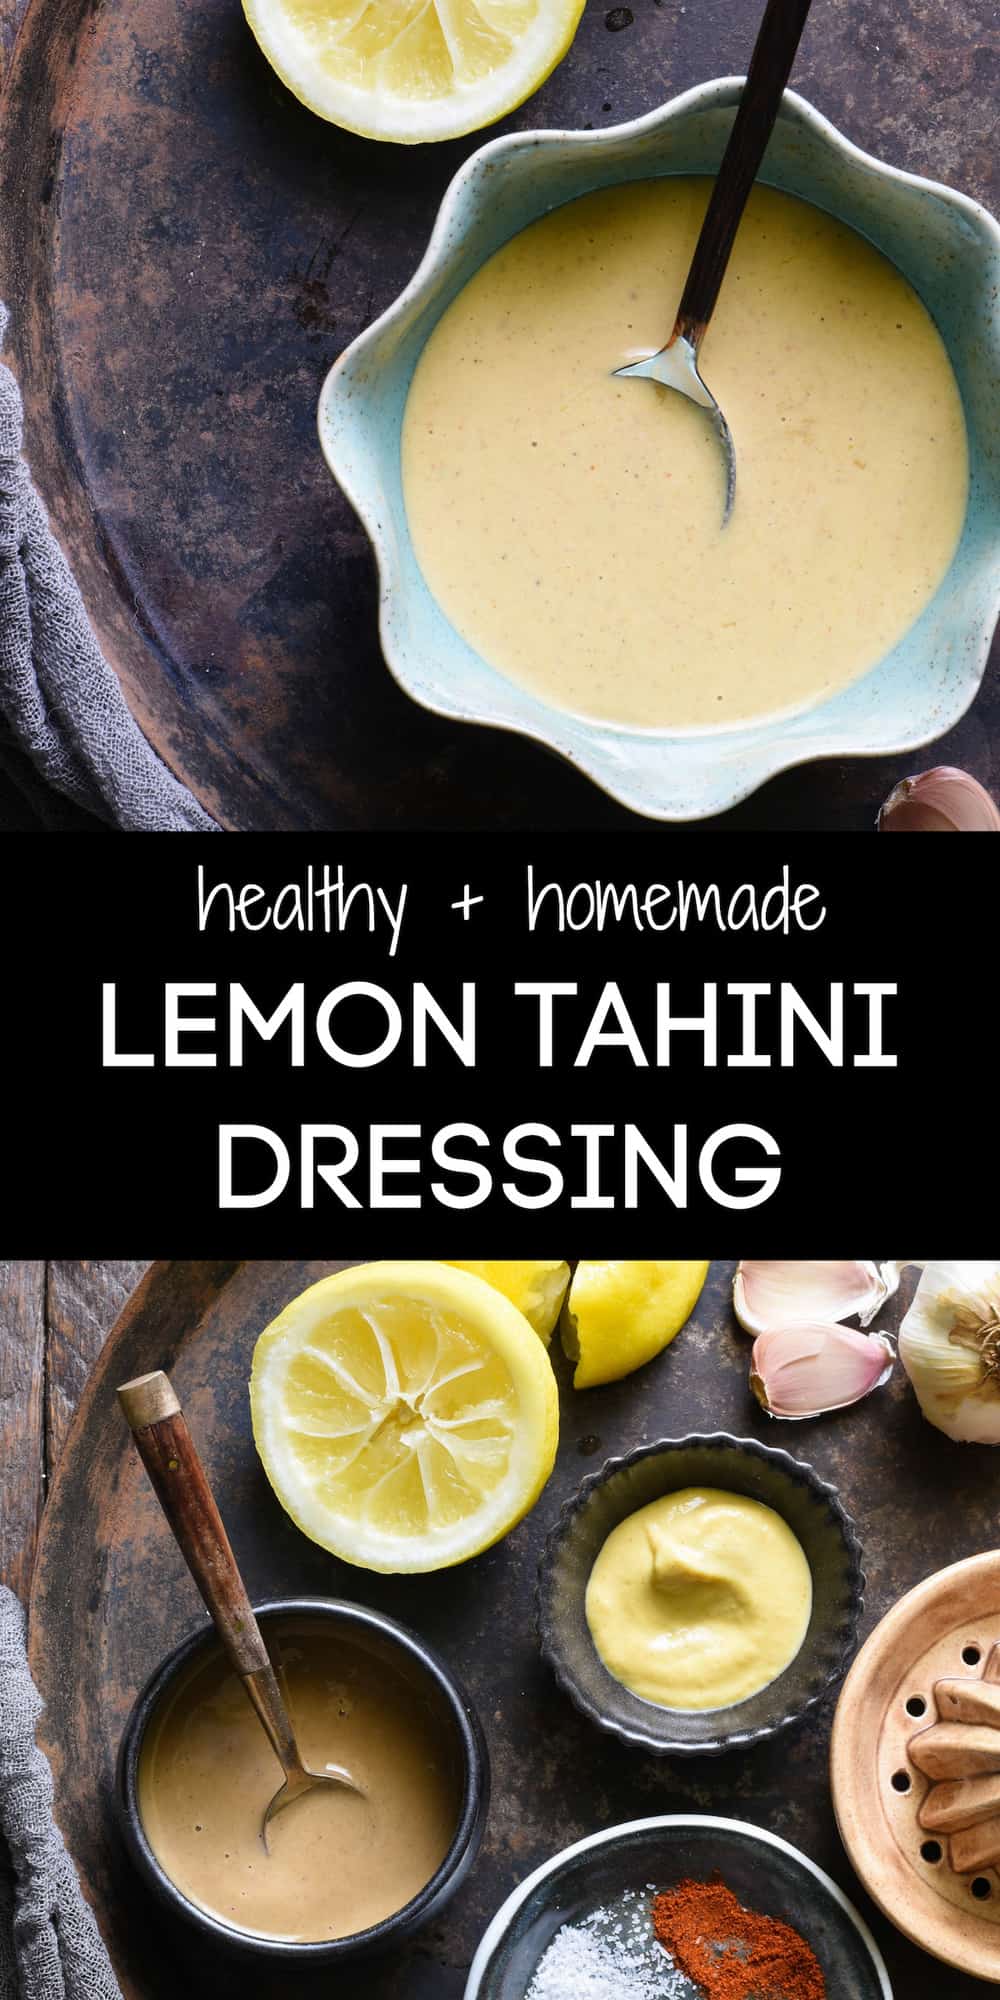 Collage of images of tahini dressing, plus ingredients for it. Caption says "healthy + homemade LEMON TAHINI DRESSING."